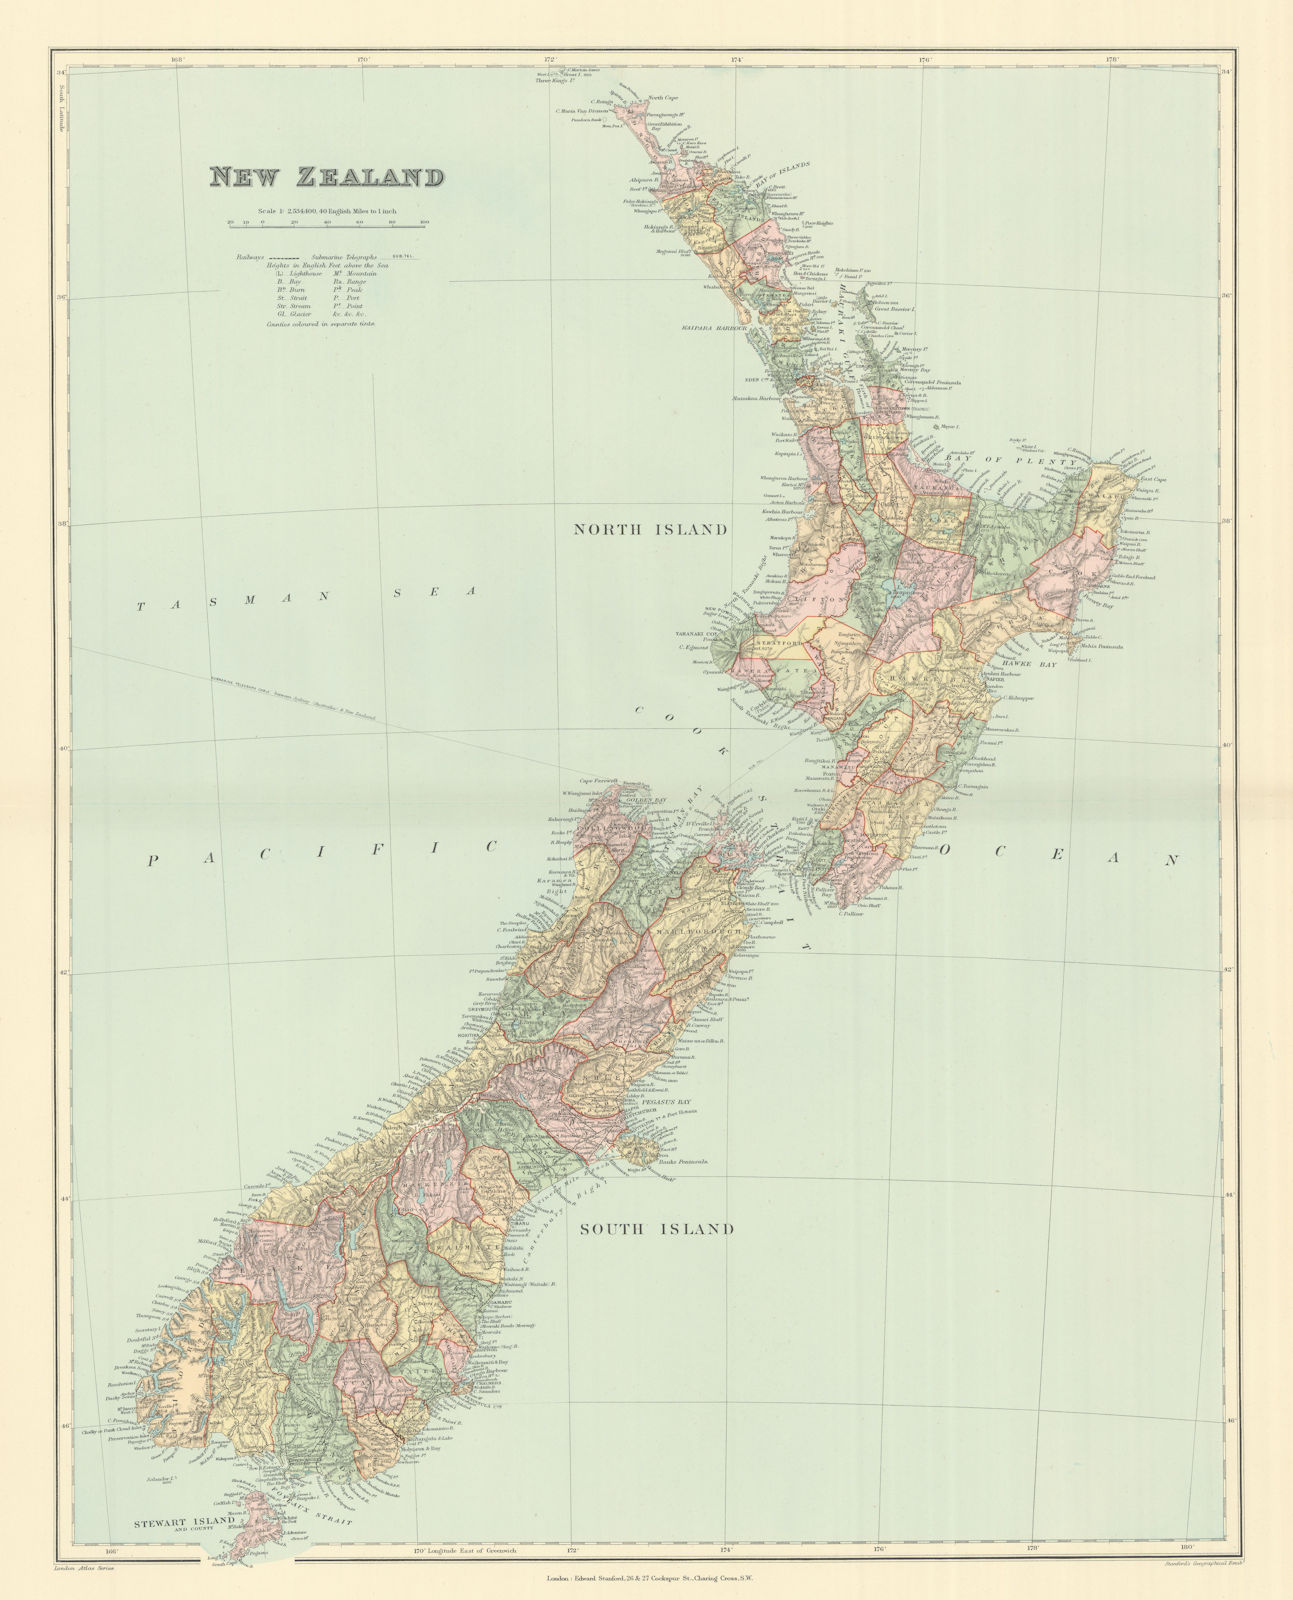 Associate Product New Zealand. Counties. Railways. Large 64x50cm. STANFORD 1894 old antique map